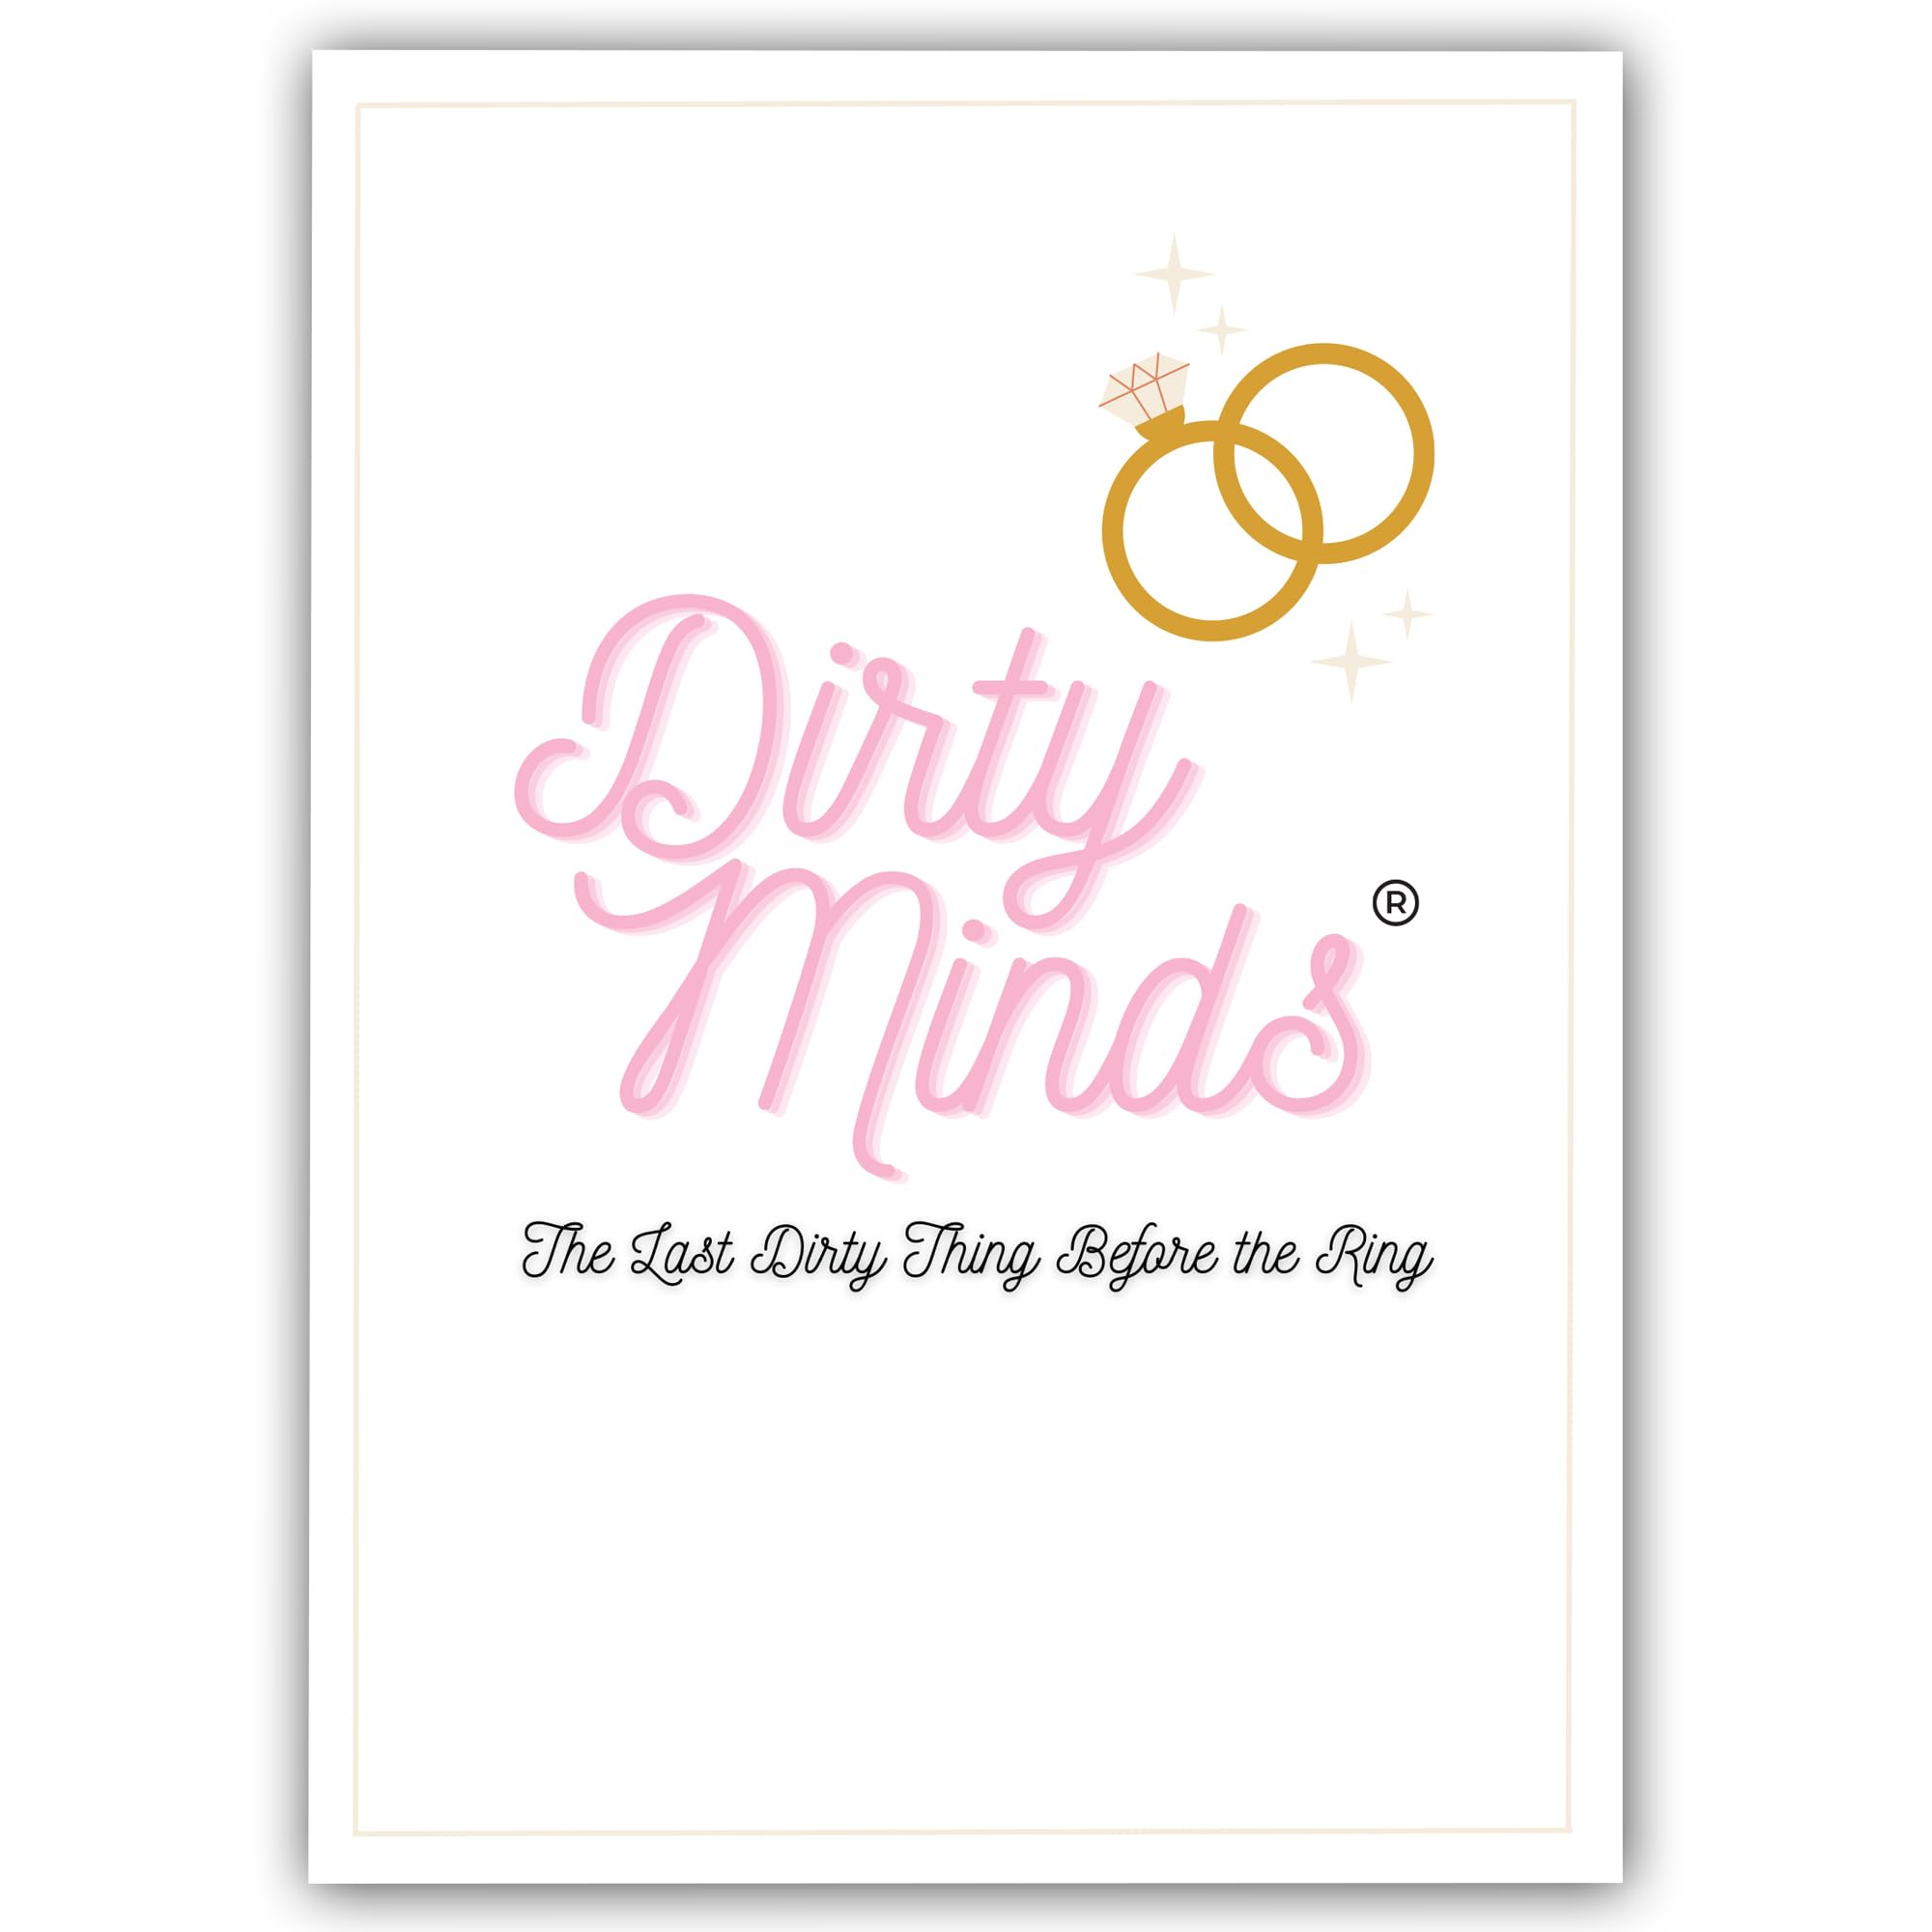 TDC Games Dirty Minds Bridal Shower Games for Adults, Bachelorette Party Games Quiz with Naughty Clues for 25 Guests, Adult Games for Game Night, Couples Games for Adults, Funny Wedding Shower Games